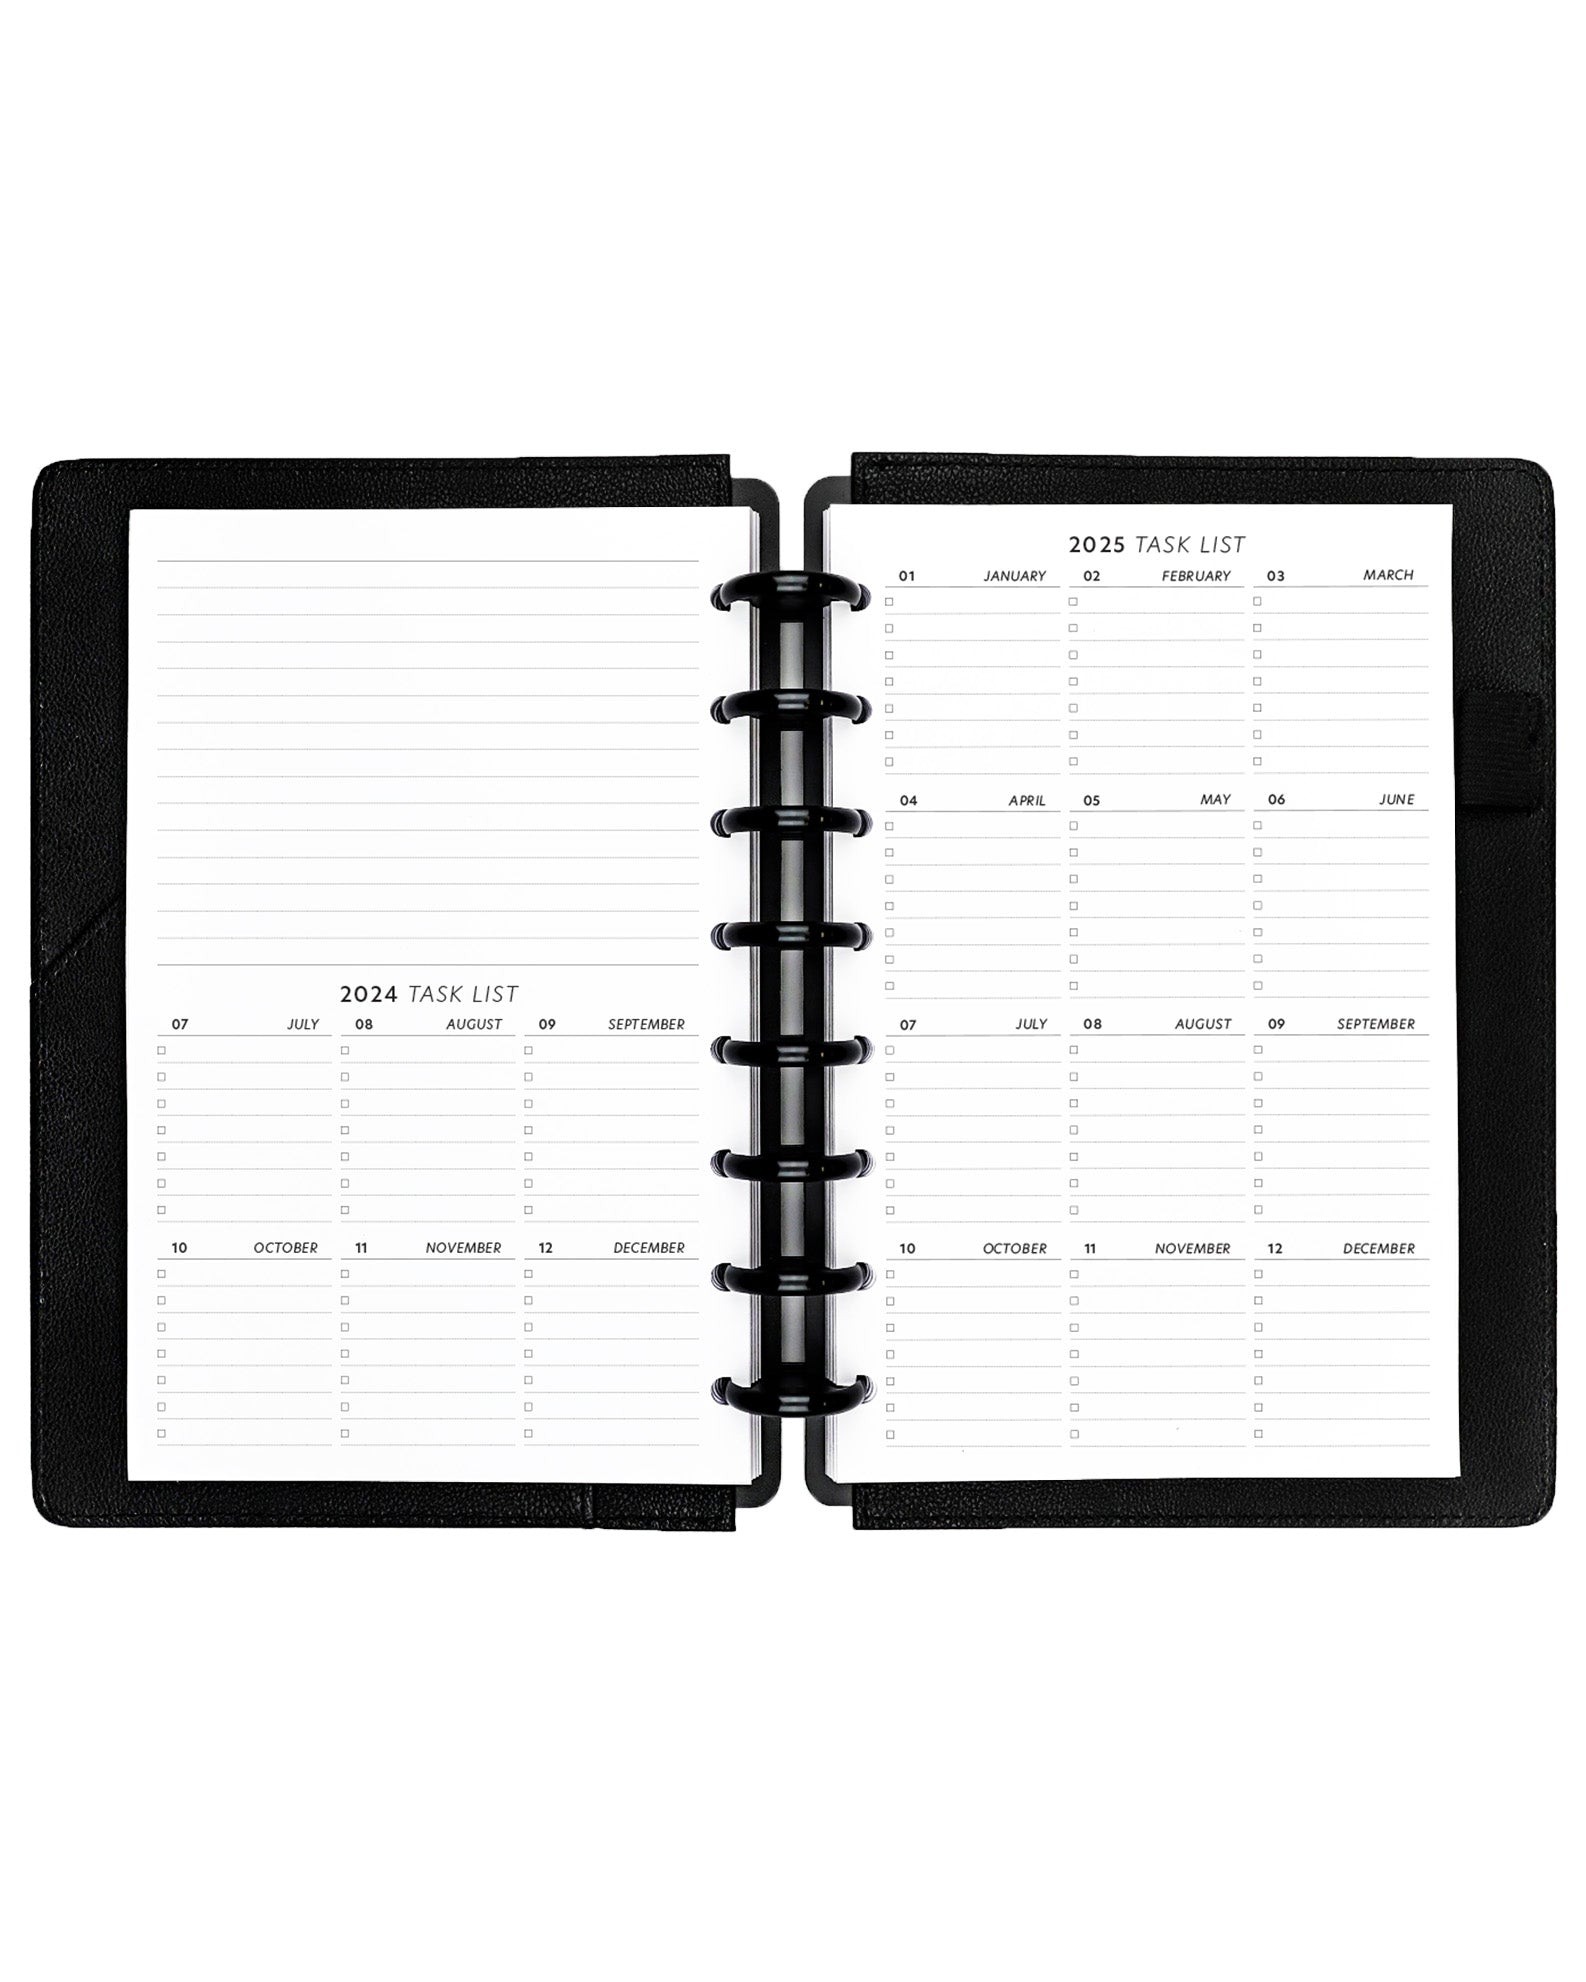 Quick glance calendar inserts planner refill pages for discbound planners, disc agendas, disc notebooks, and A5 siz e ringbound planner systems by Jane's Agenda.